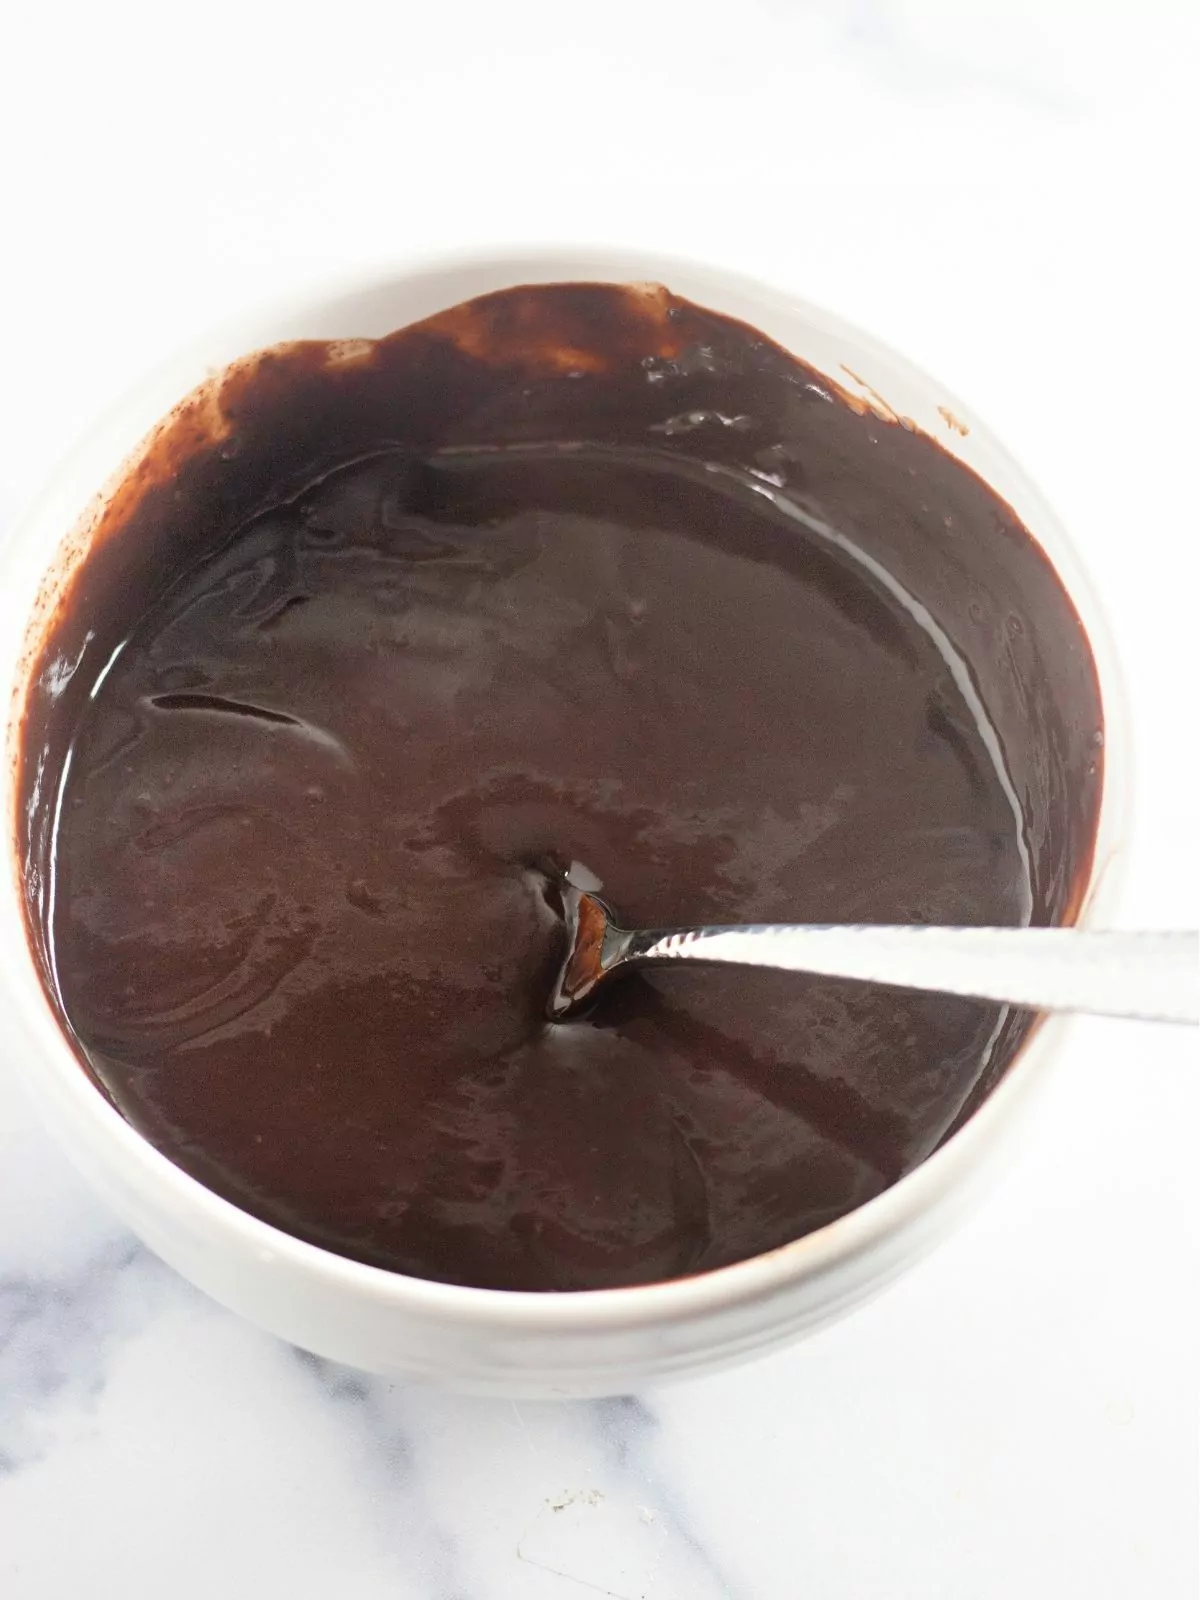 heavy cream melted chocolate mixture in bowl with spoon.